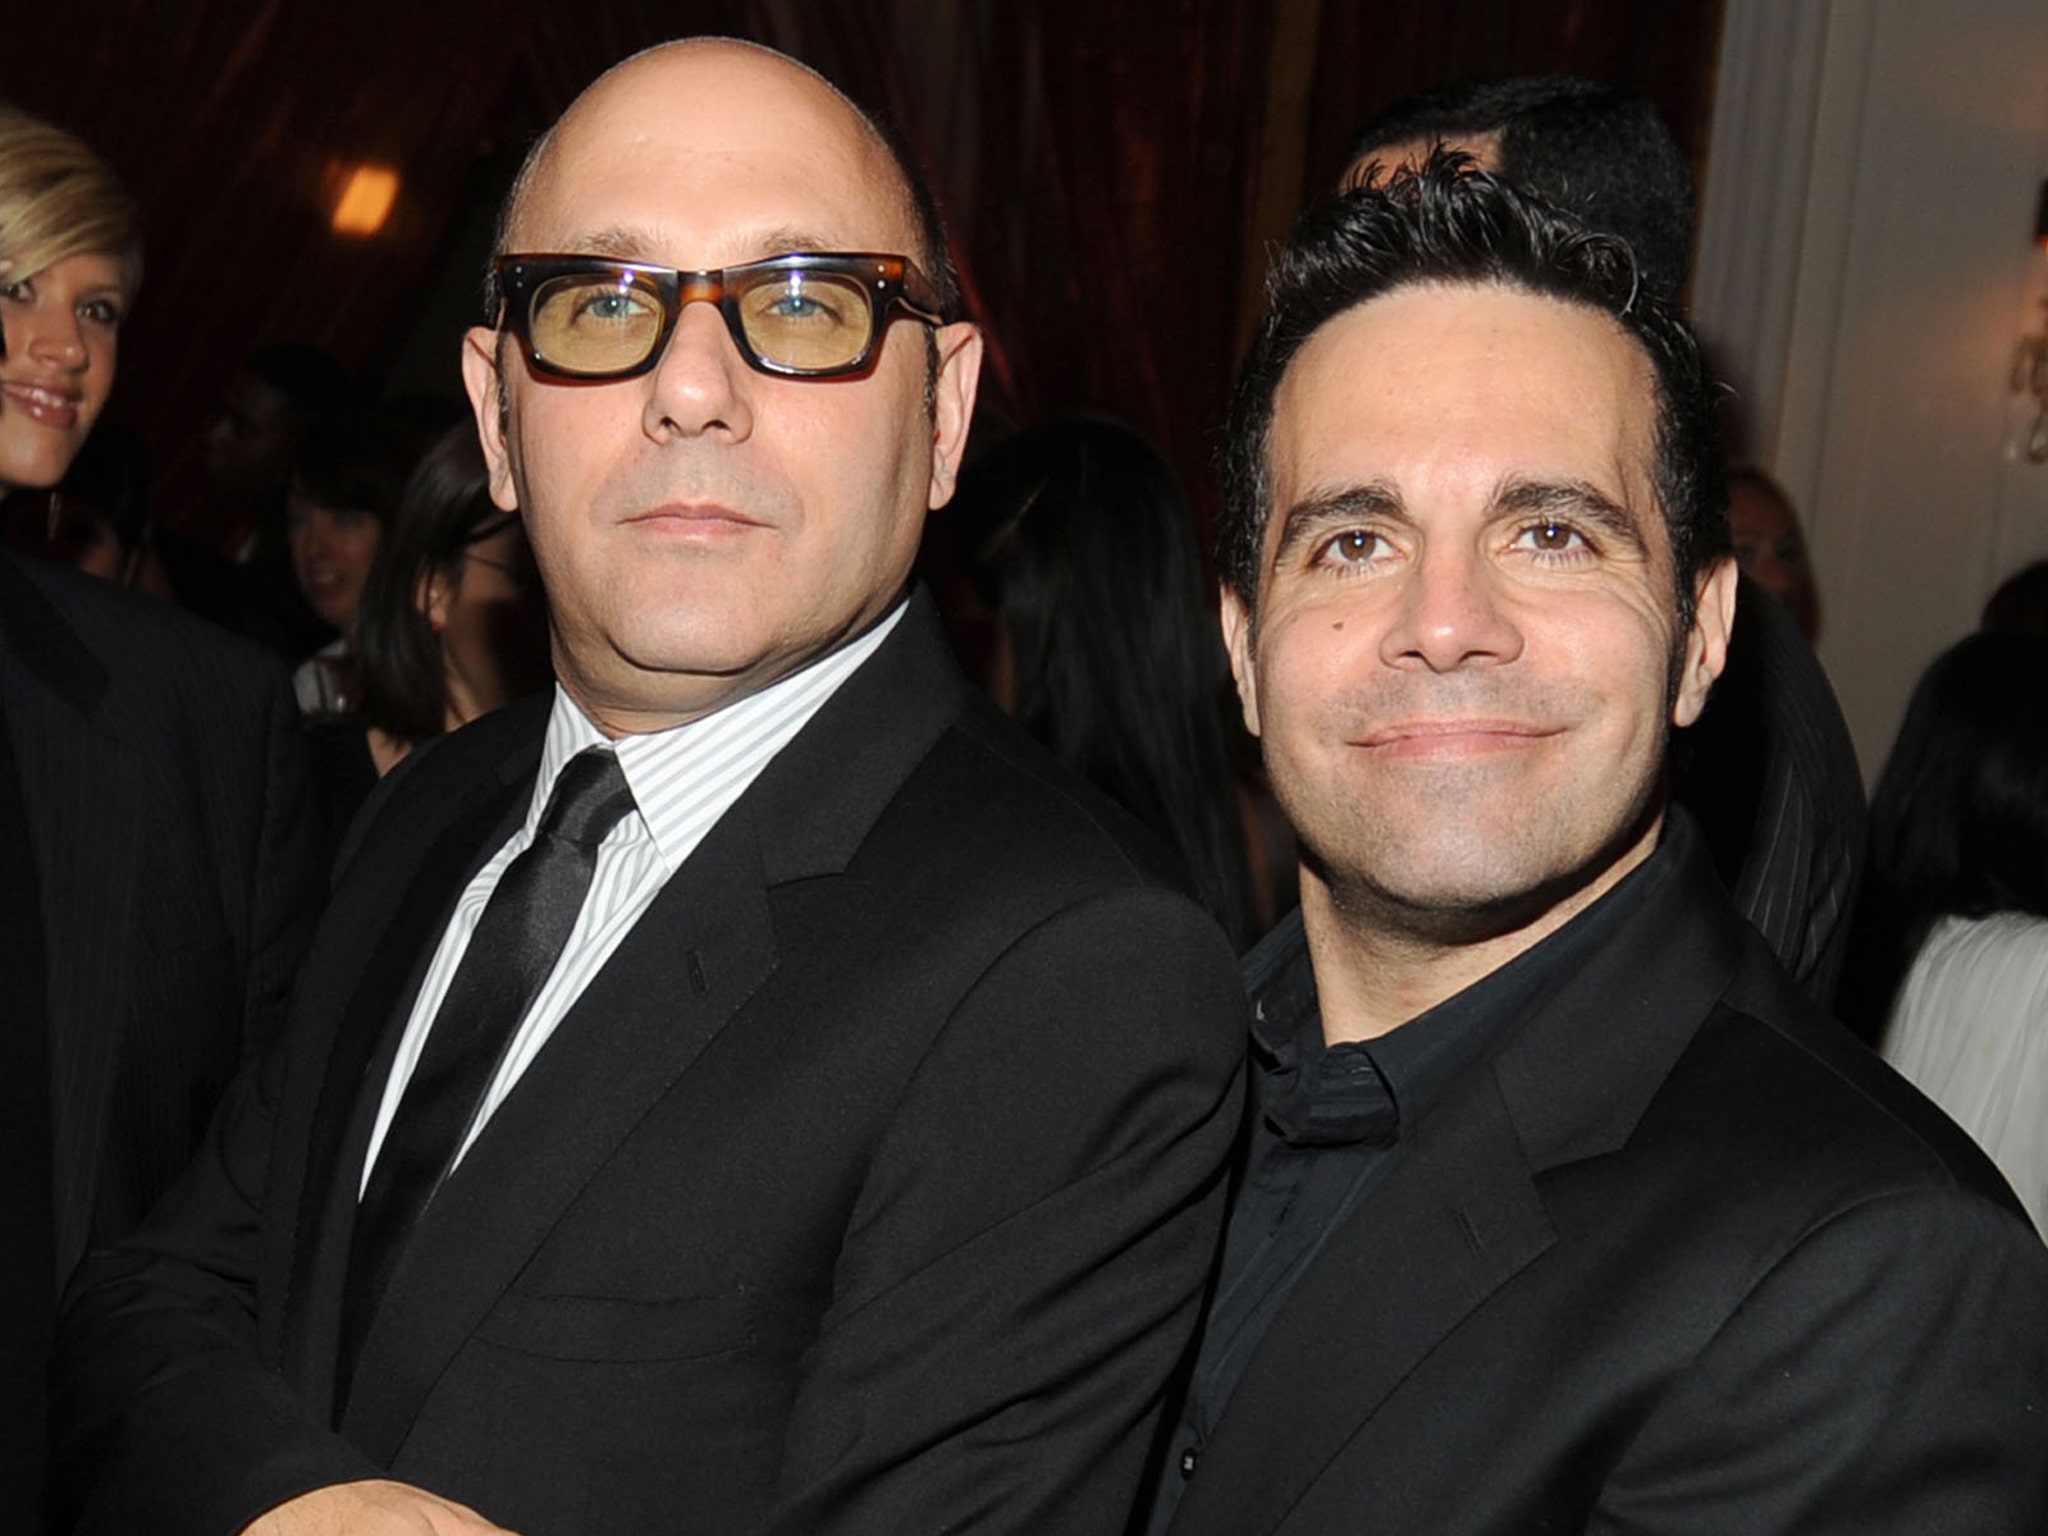 Willie Garson gets emotional sendoff from 'And Just Like That